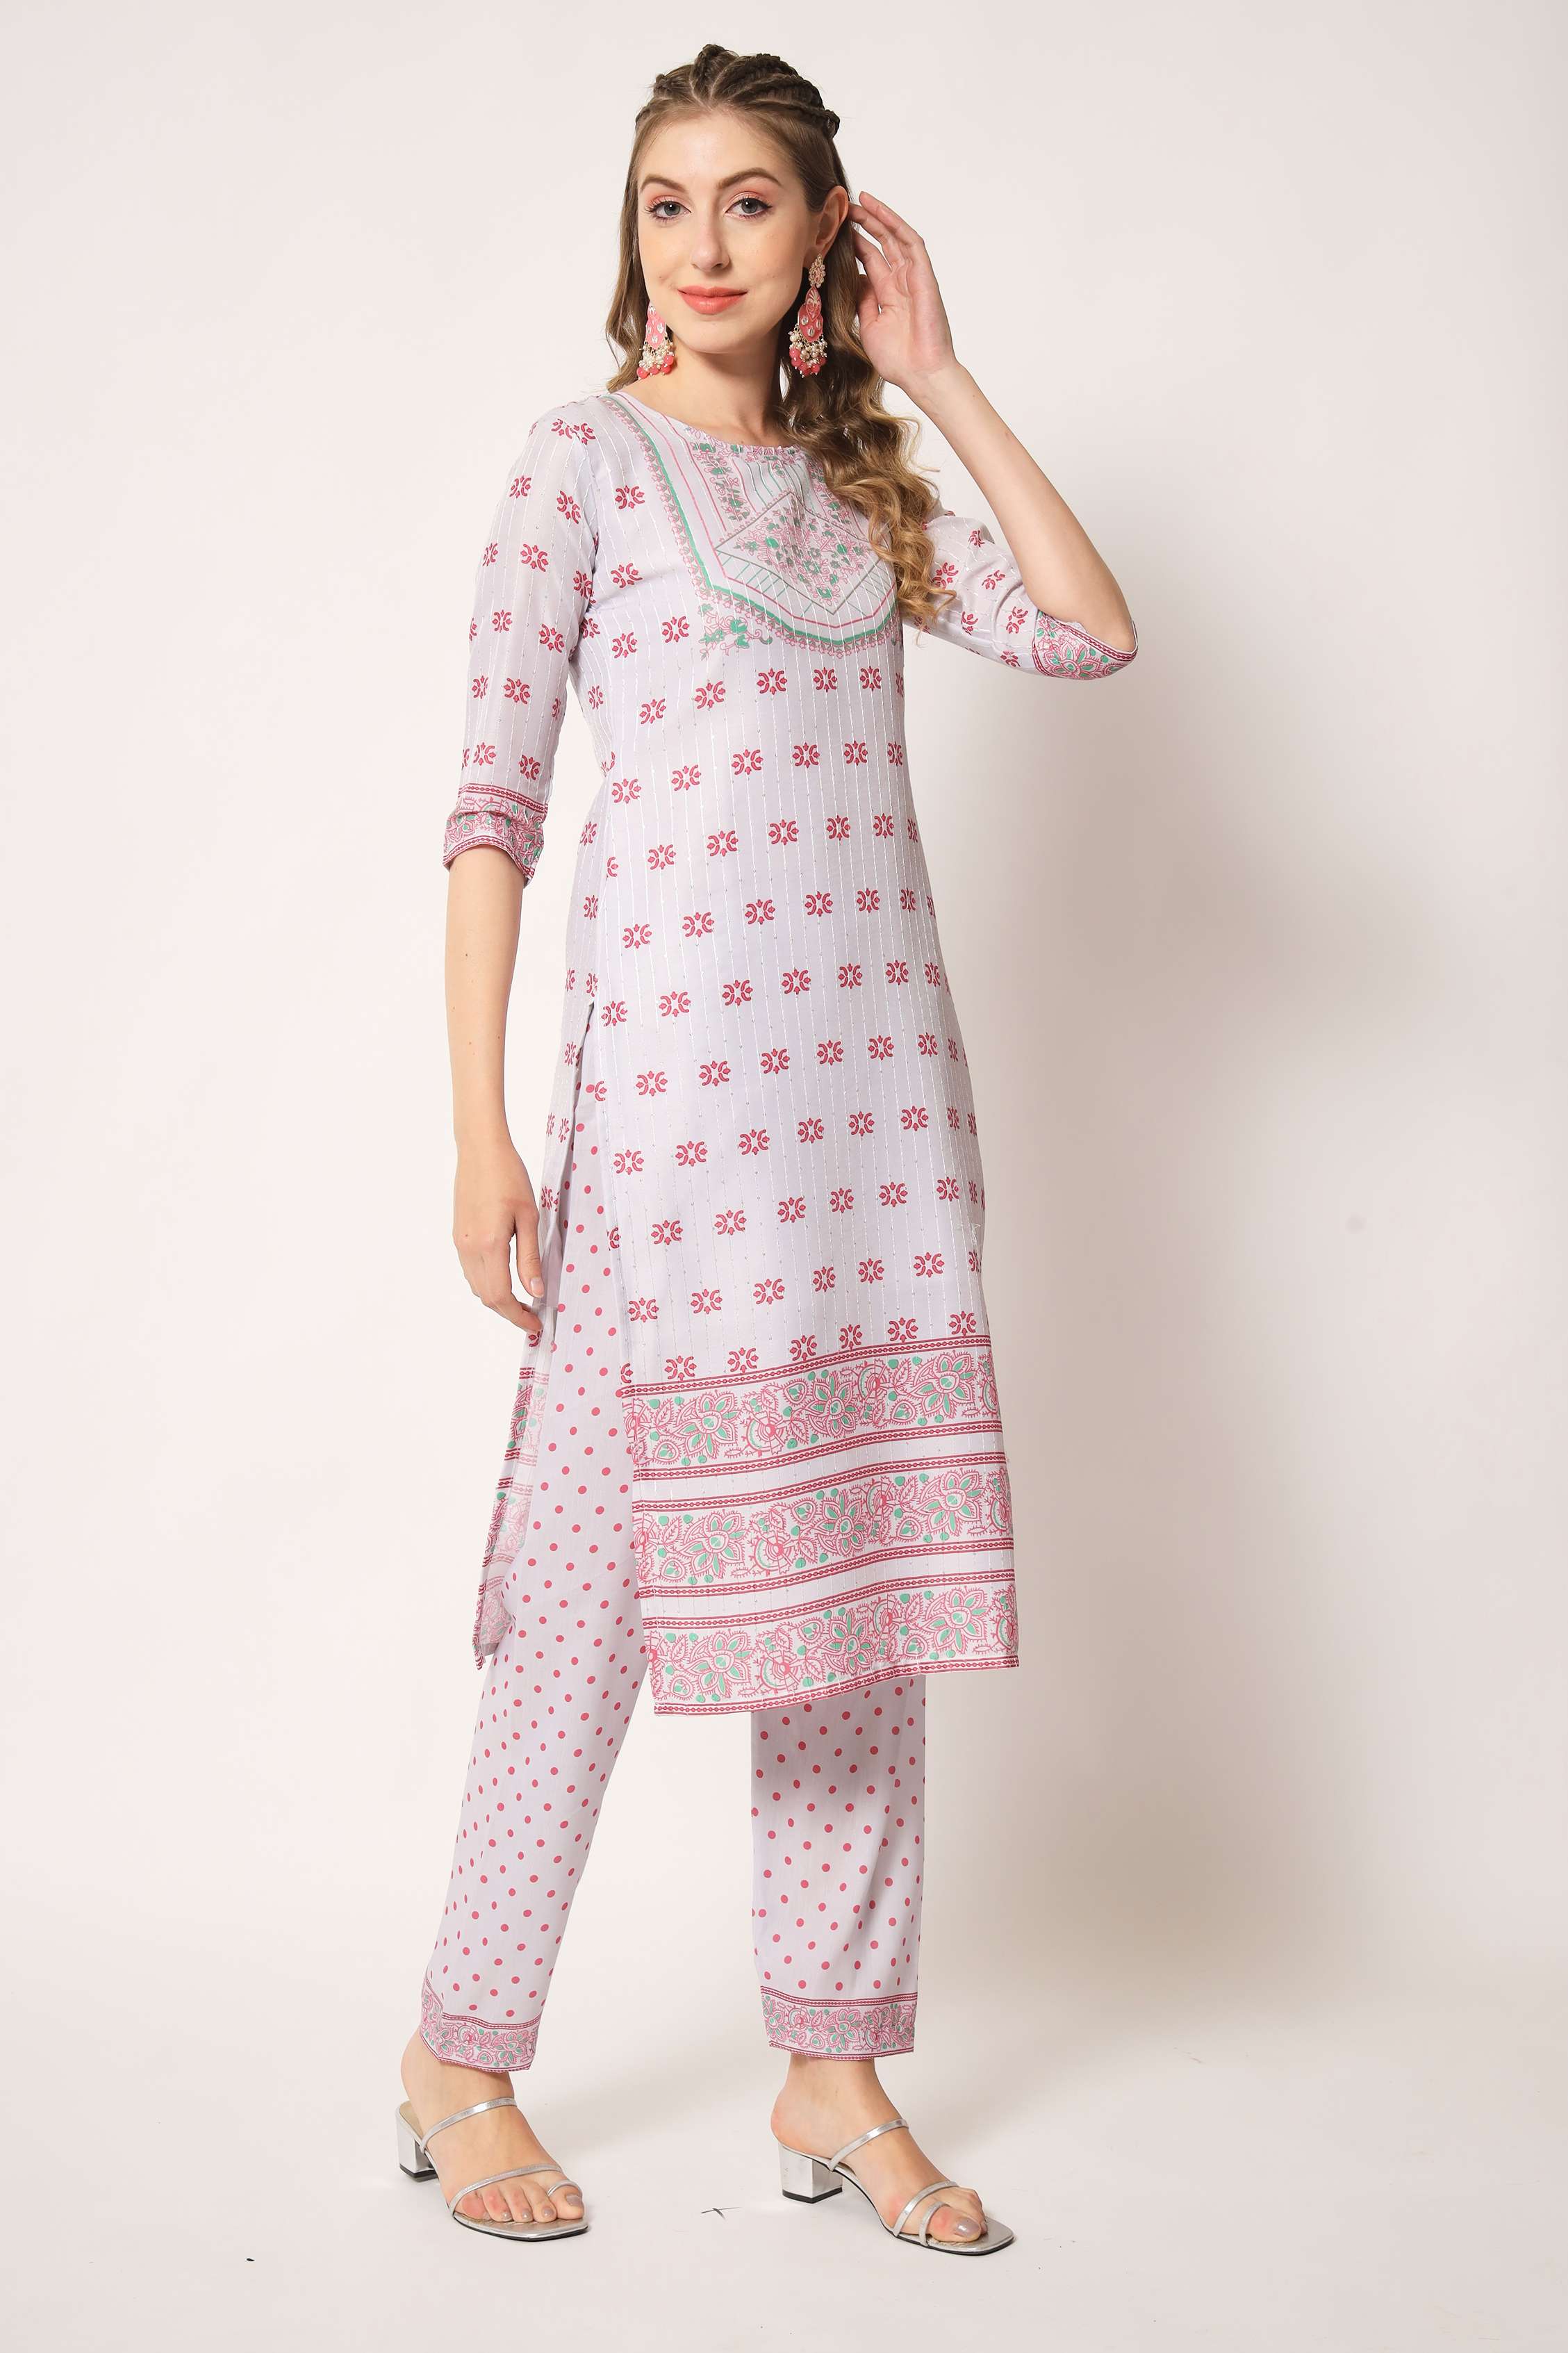 Embroidered Muslin White & Red Trendy Salwar Kameez For Women